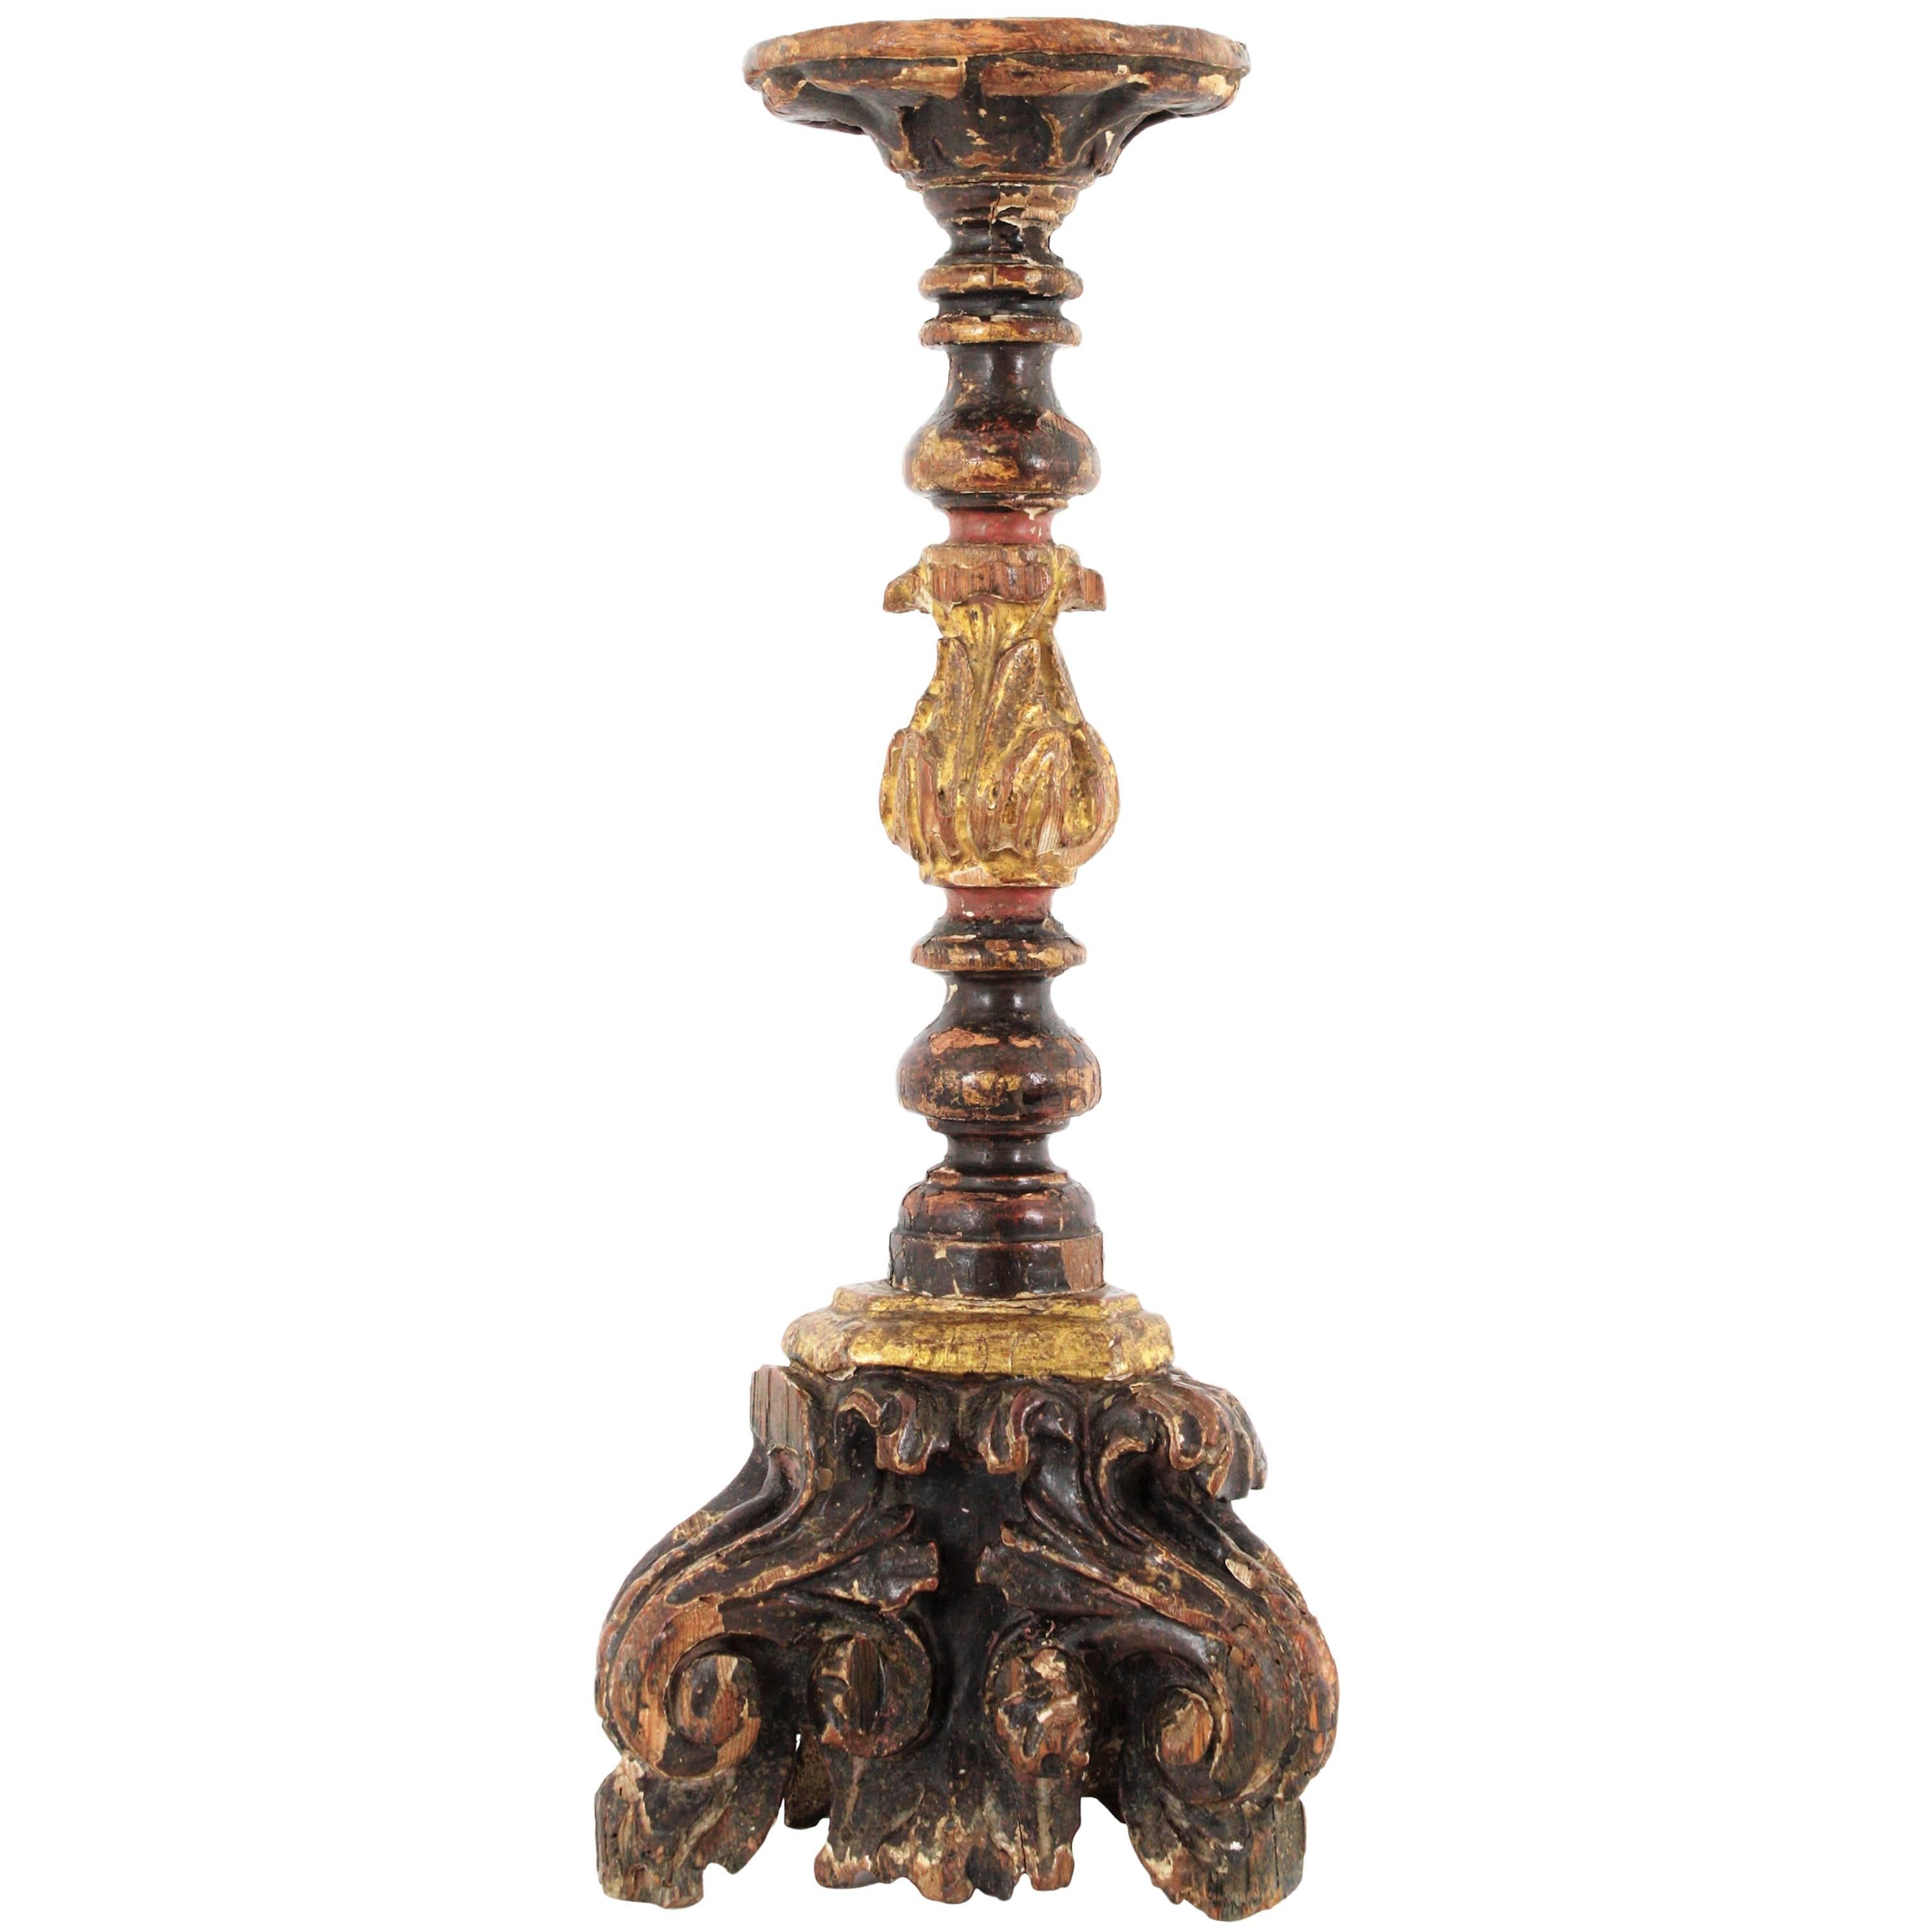 A finely carved late 18th century Baroque style candlestick with gilt and polichrome details, Spain, circa 1780.
This beautiful handcrafted candleholder with hand painted details in warm colors has gold leaf finish and a terrific antique